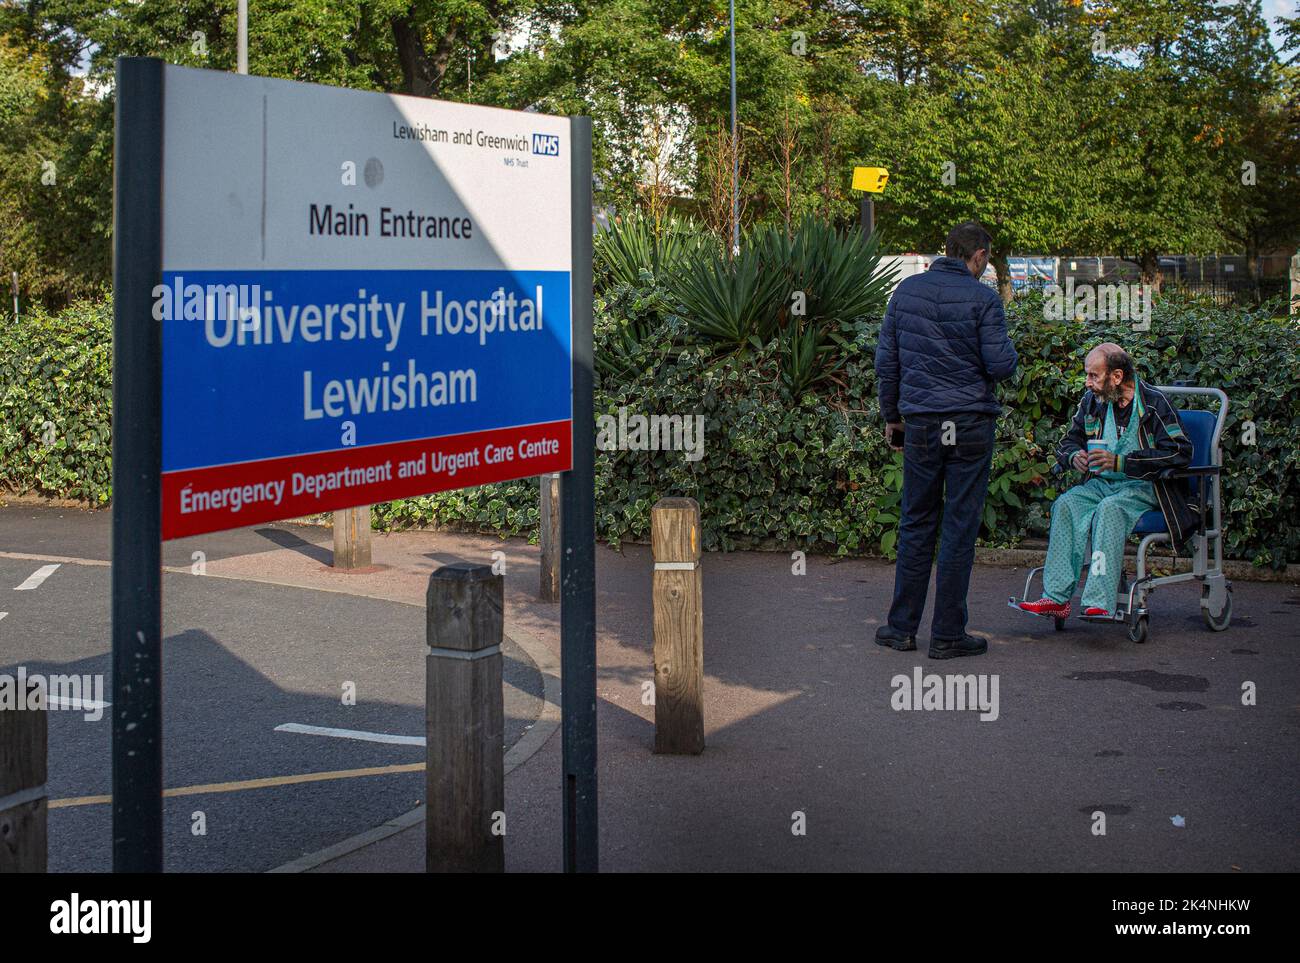 London, UK. Sept 29 2022 .Patient is seen in a wheel chair outside University Hospital Lewisham . Stock Photo